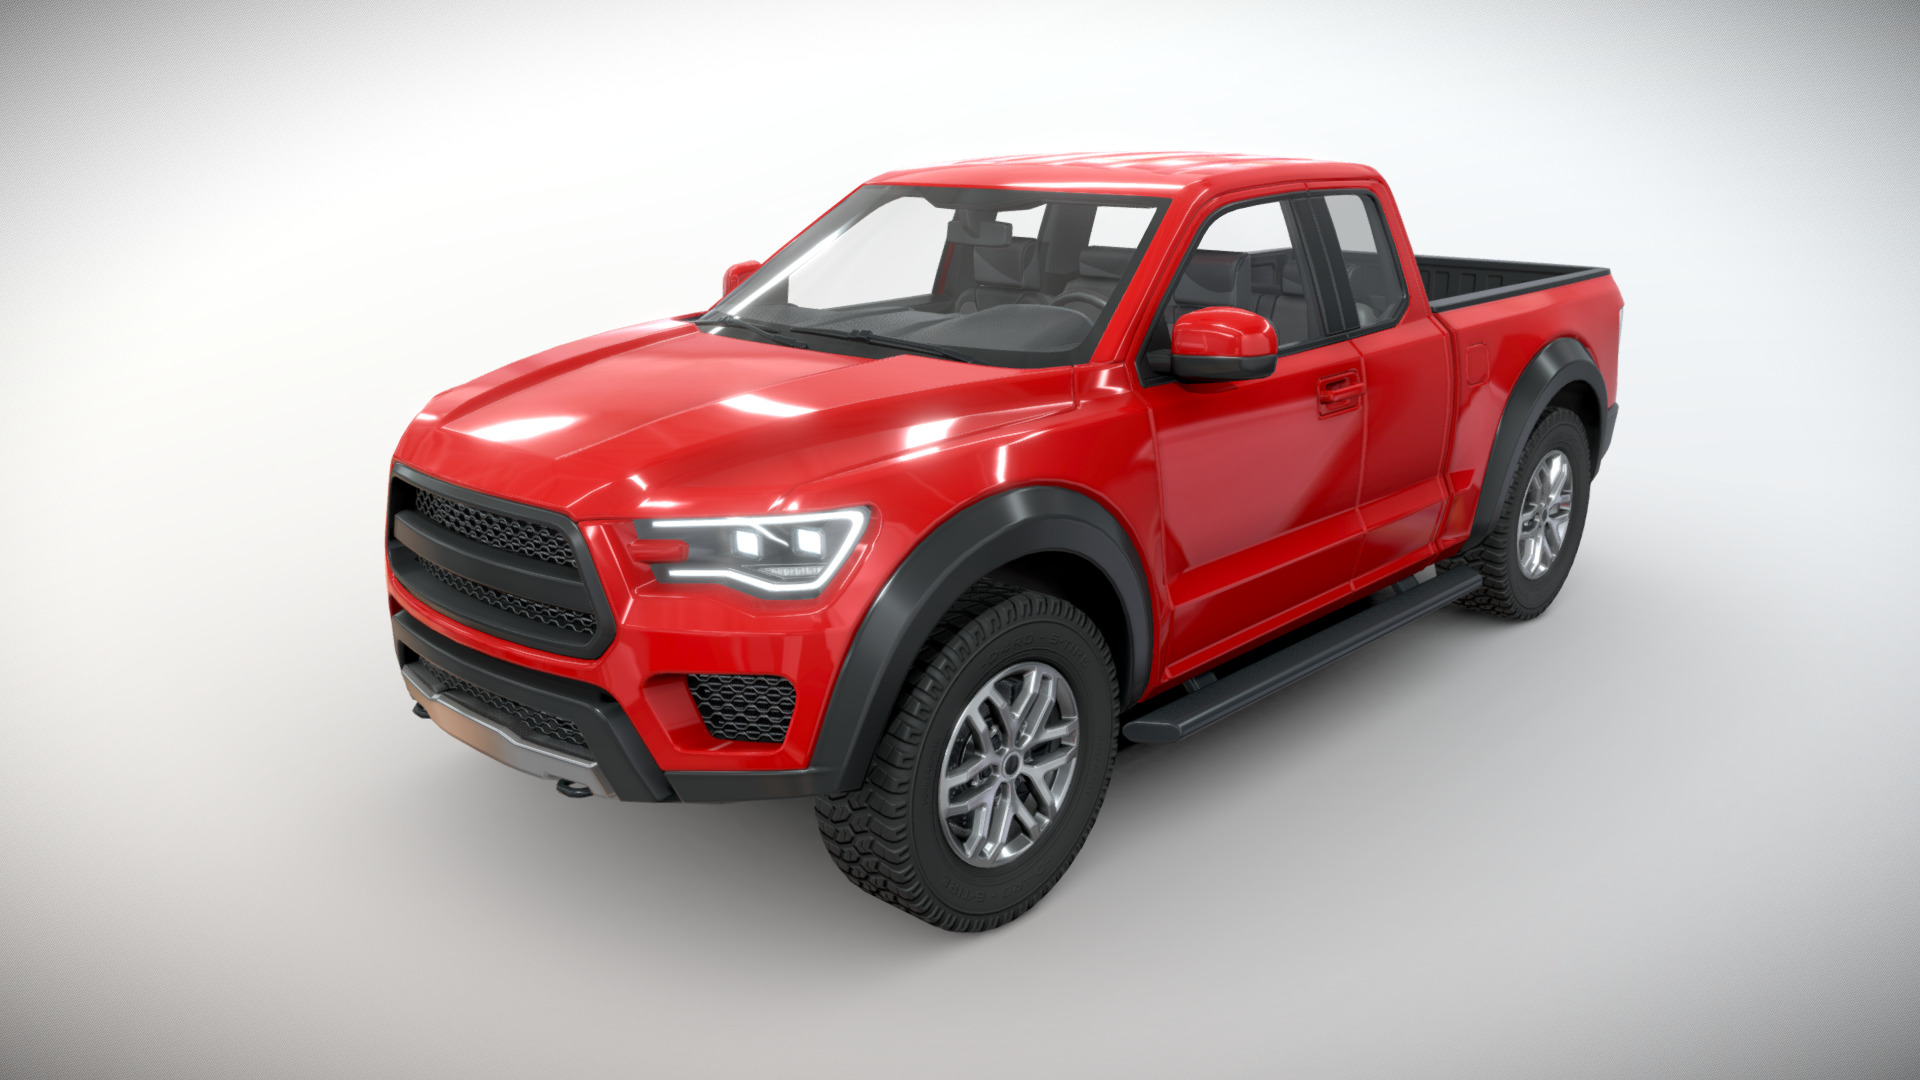 3D model Realistic Car HD 04 - This is a 3D model of the Realistic Car HD 04. The 3D model is about a red car with a white background.